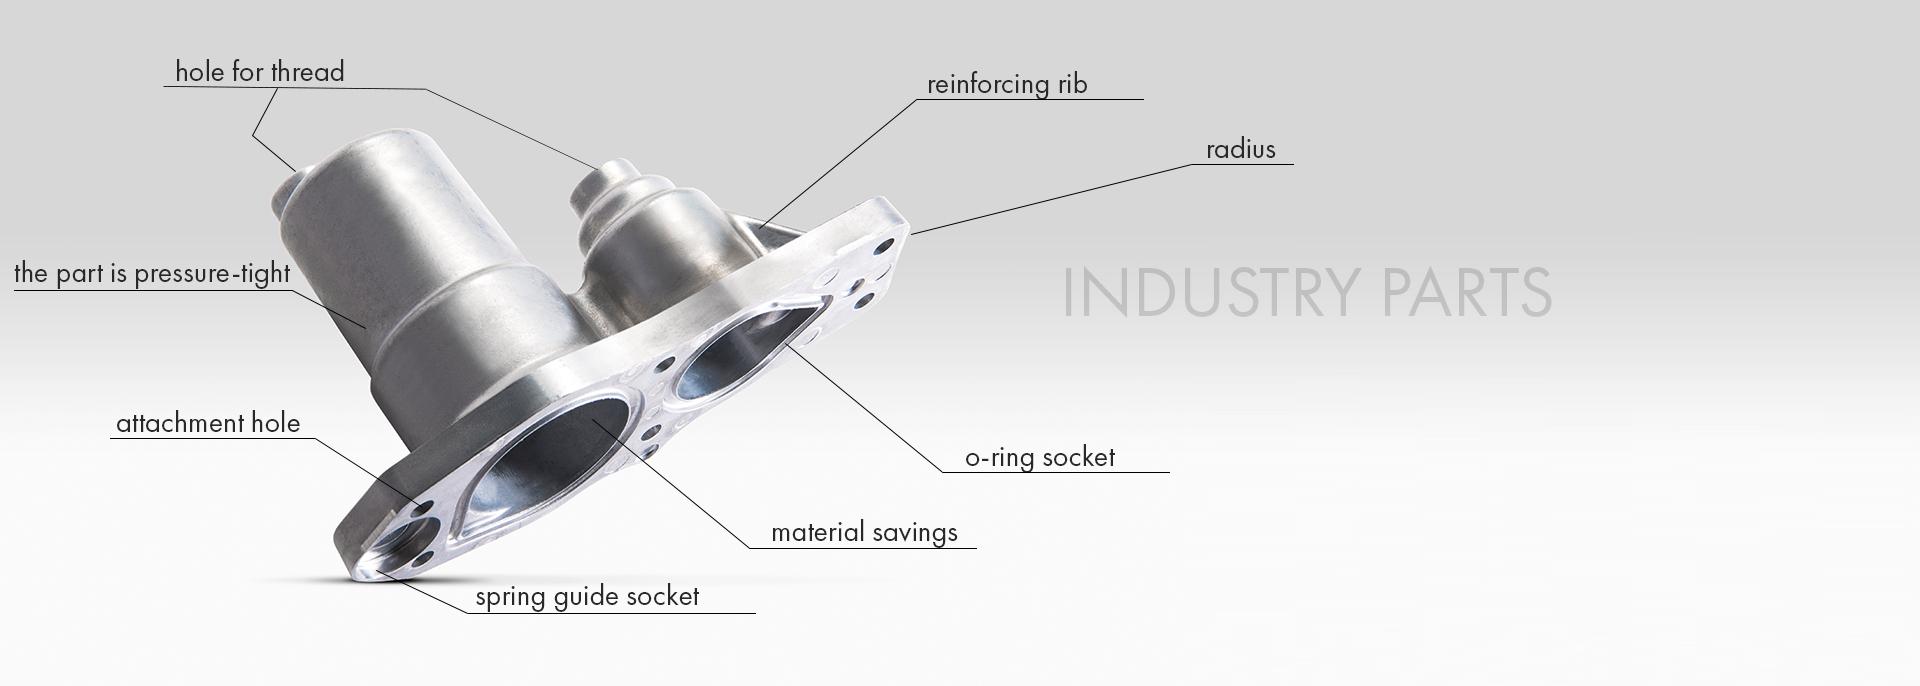 Die casting details for furniture and other industries